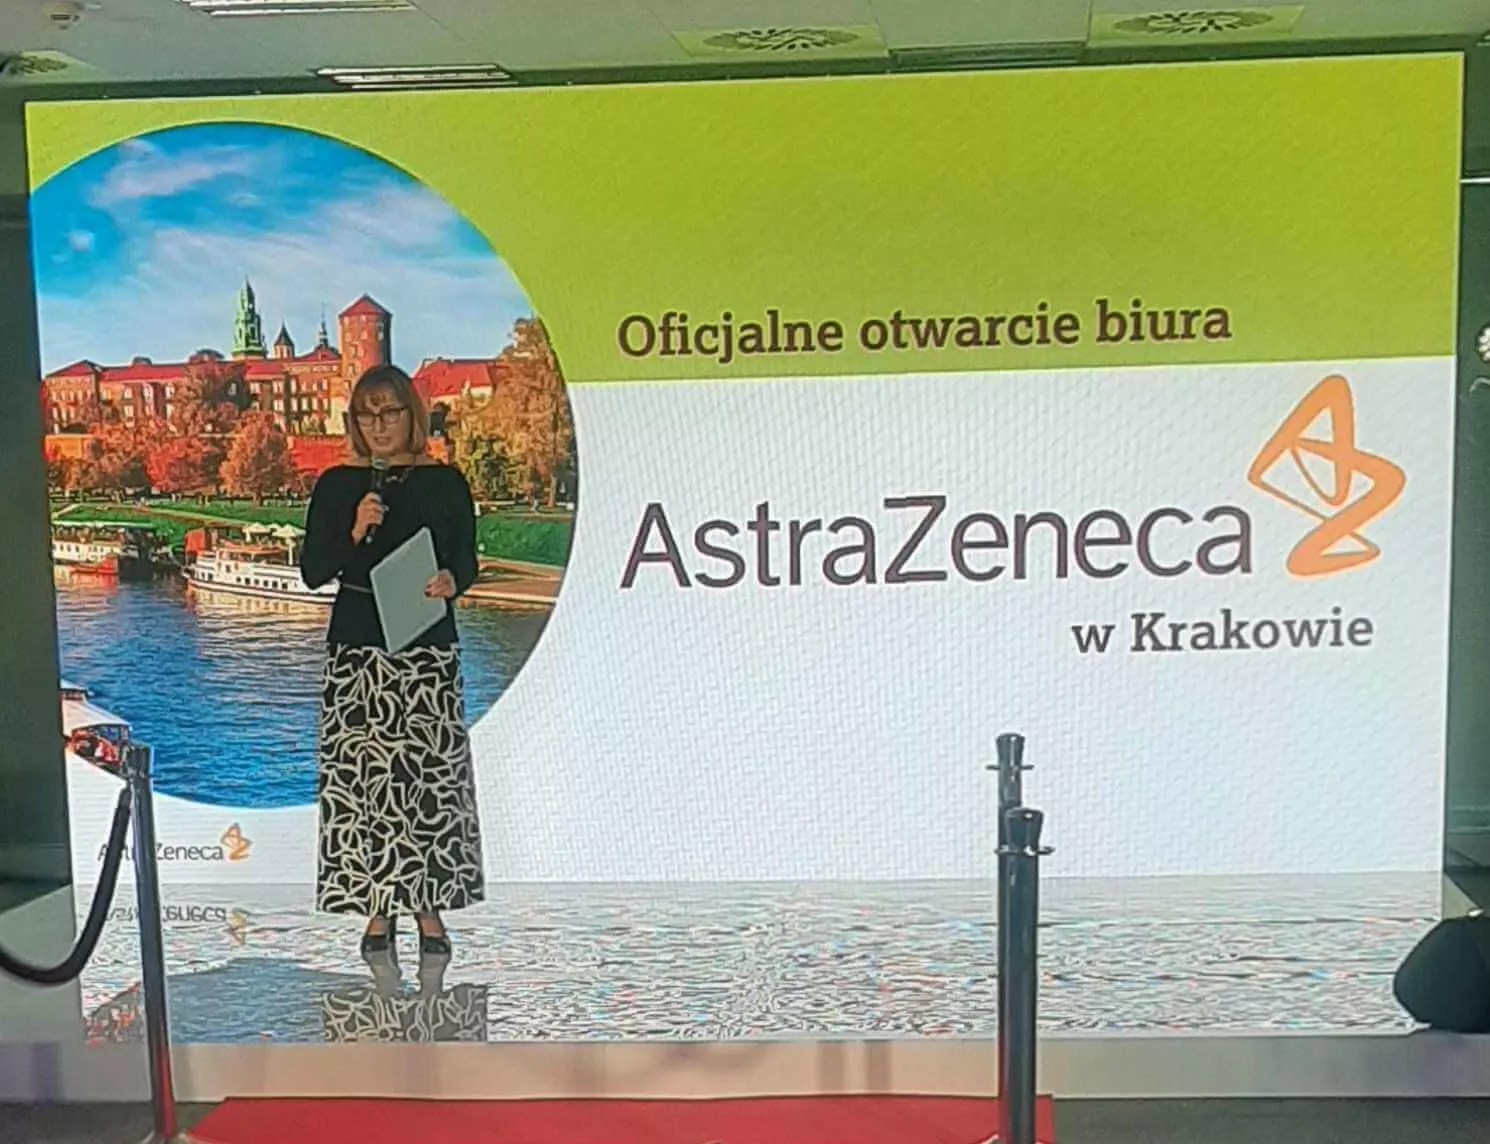 Sano among the guests at the grand opening of the new AstraZeneca office in Krakow